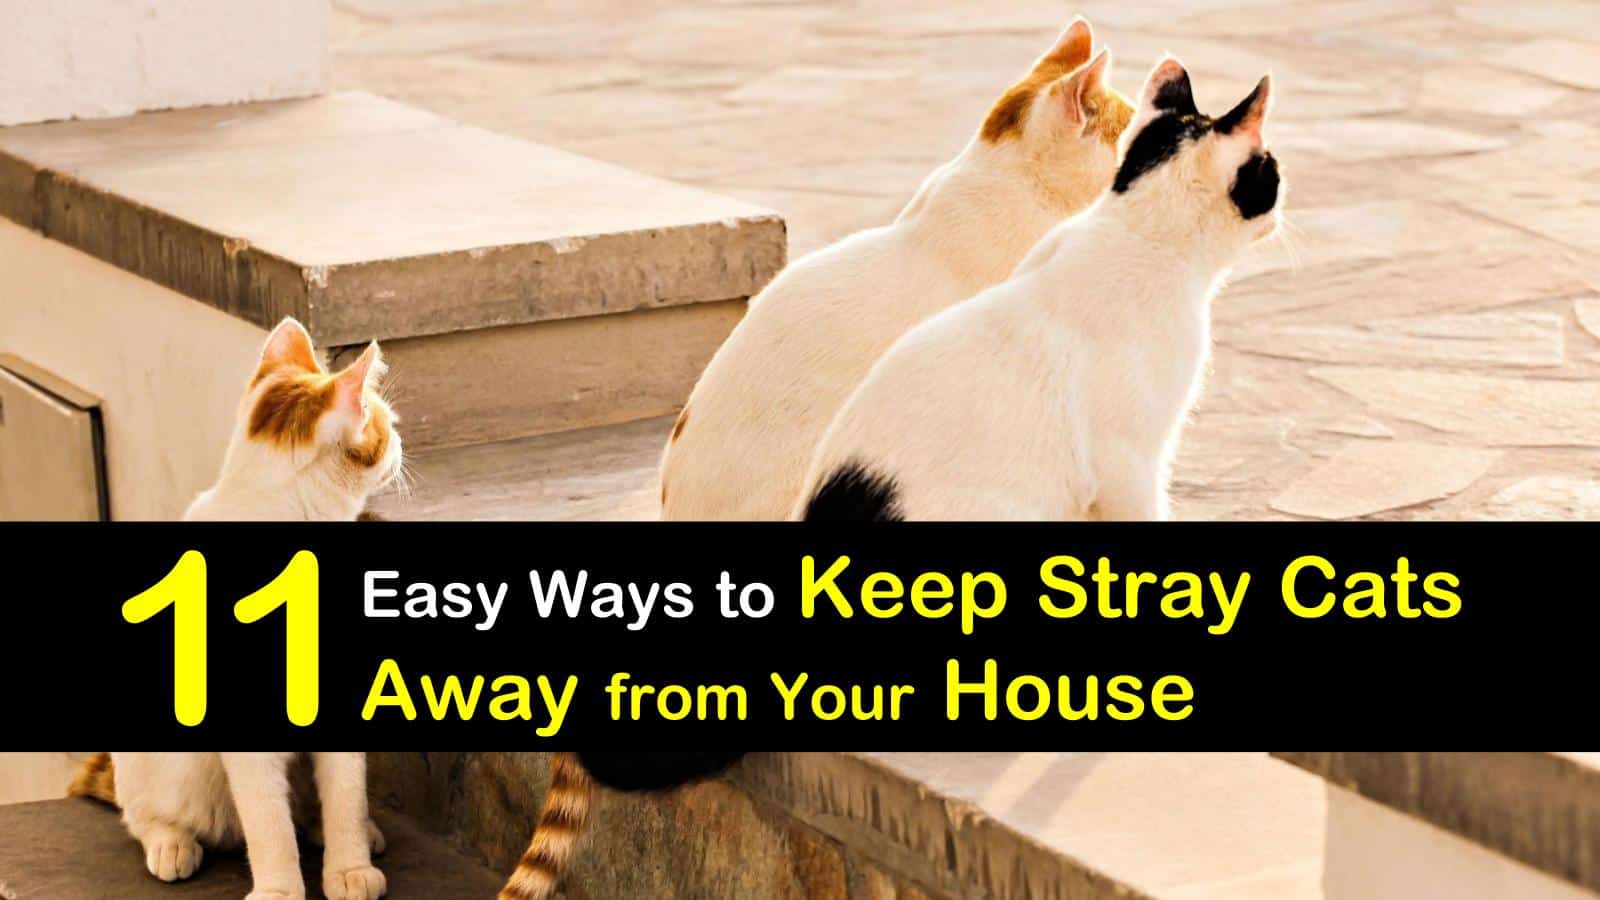 keep stray cats away from your house titleimg1